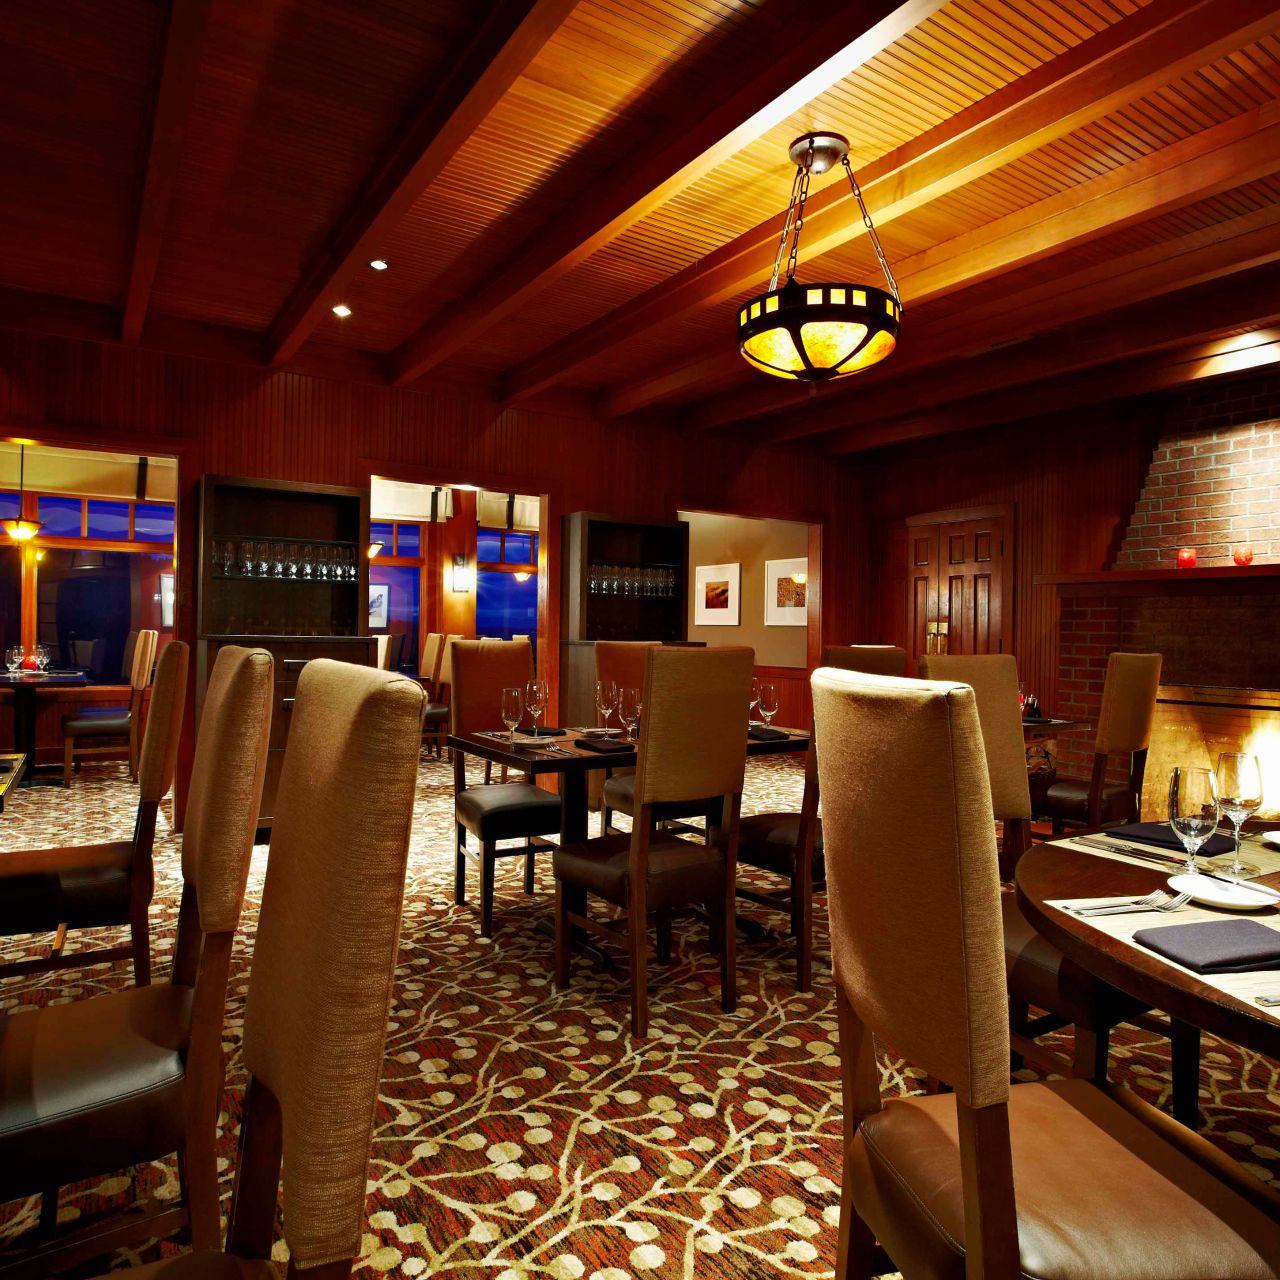 The Dining Room At Salish Lodge Spa, The Dining Room At Salish Lodge Snoqualmie